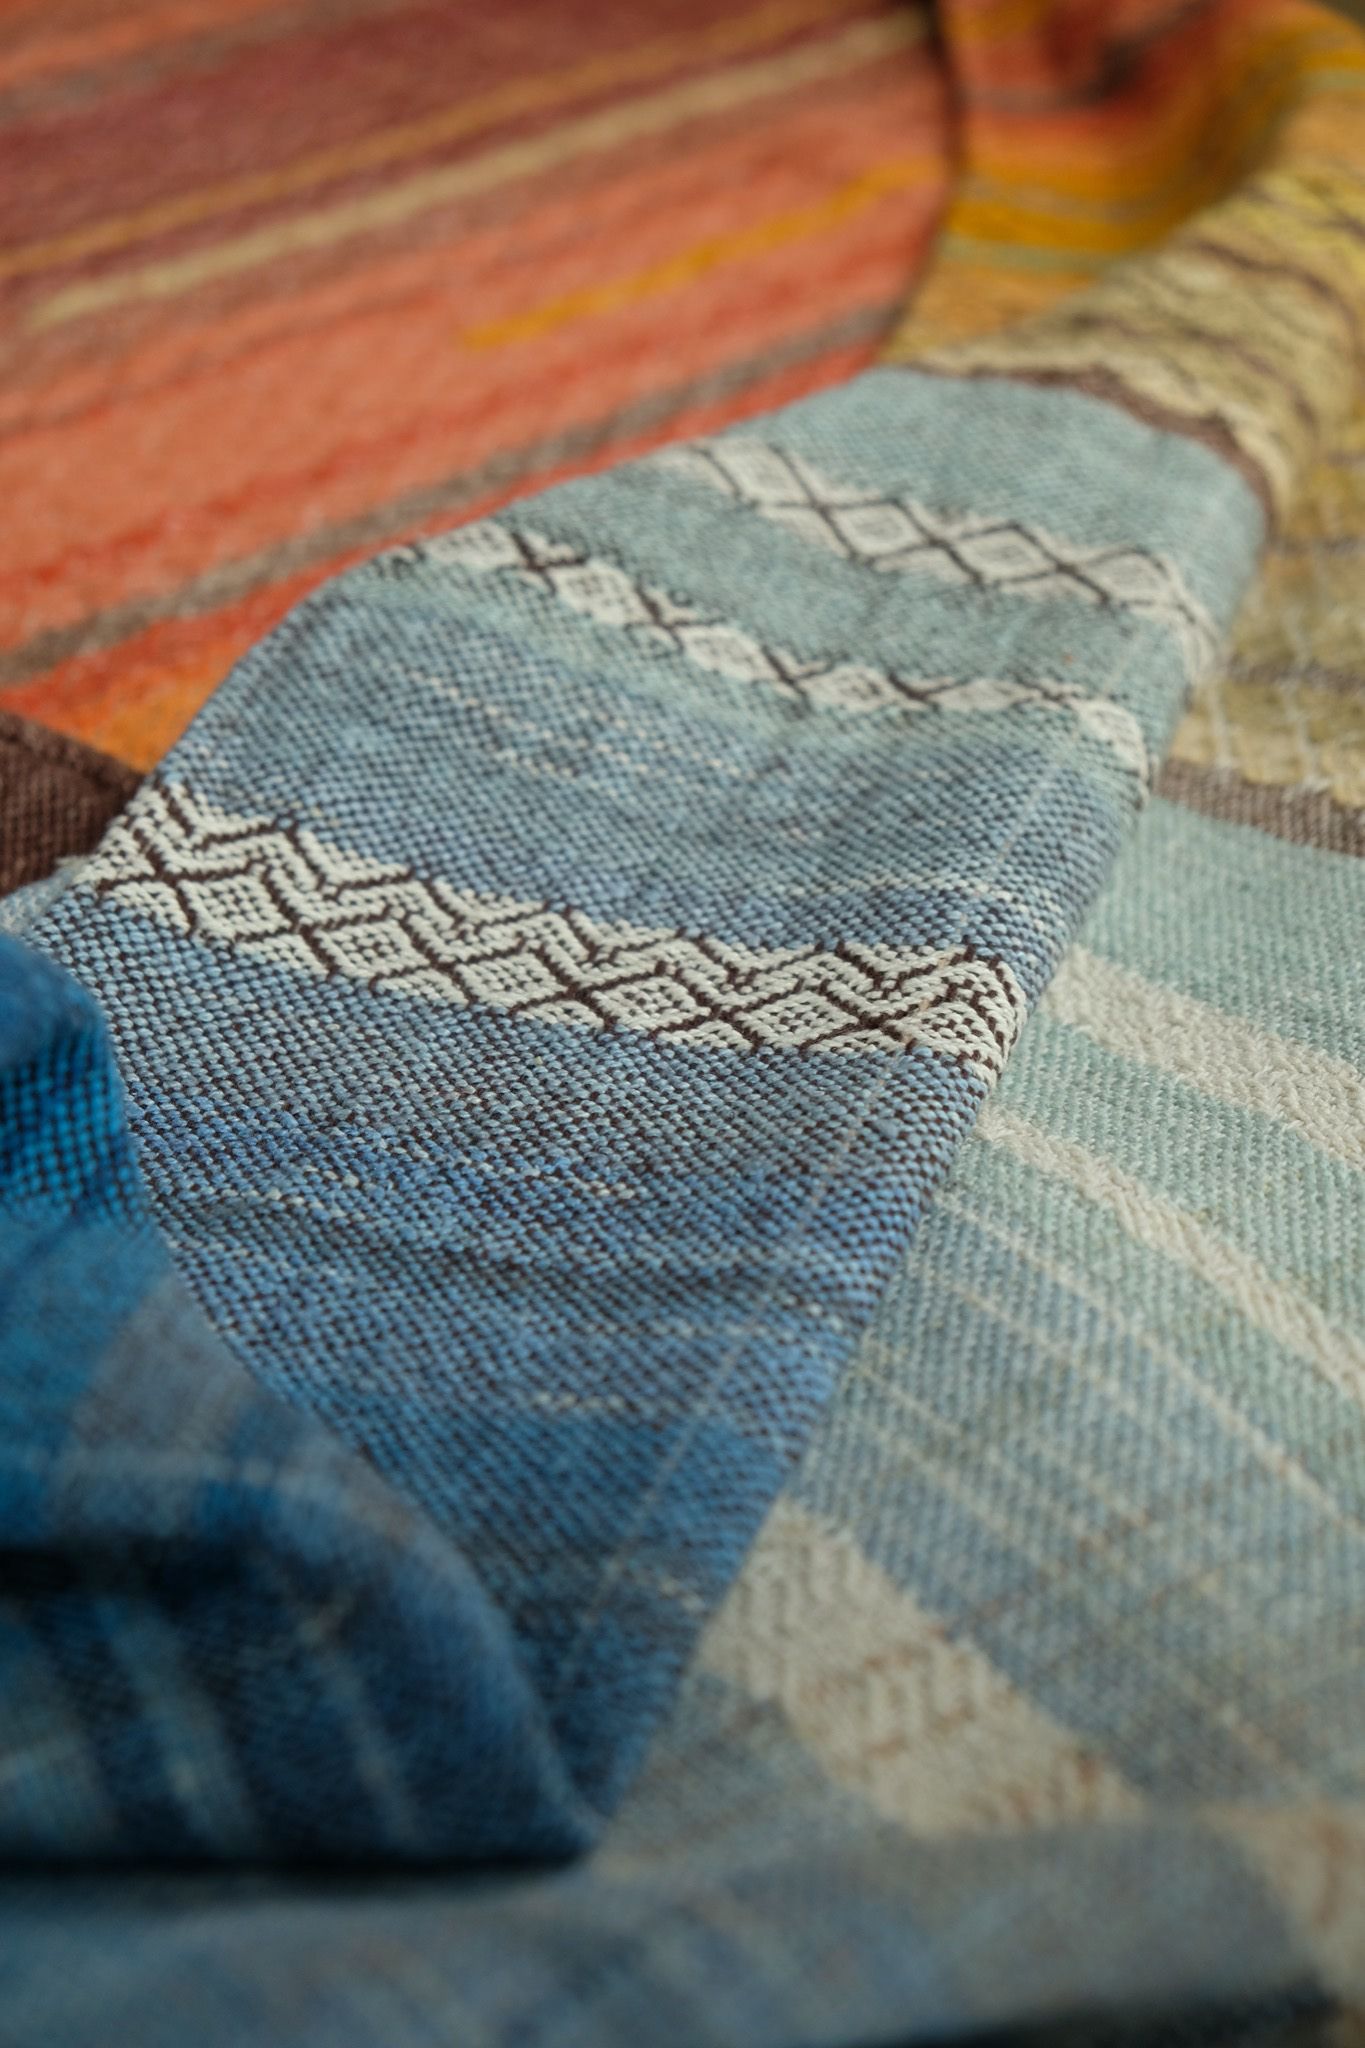 detail of Large brown, red, orange, yellow, blue and green piece of handwoven fabric laying on a wooden floor. 